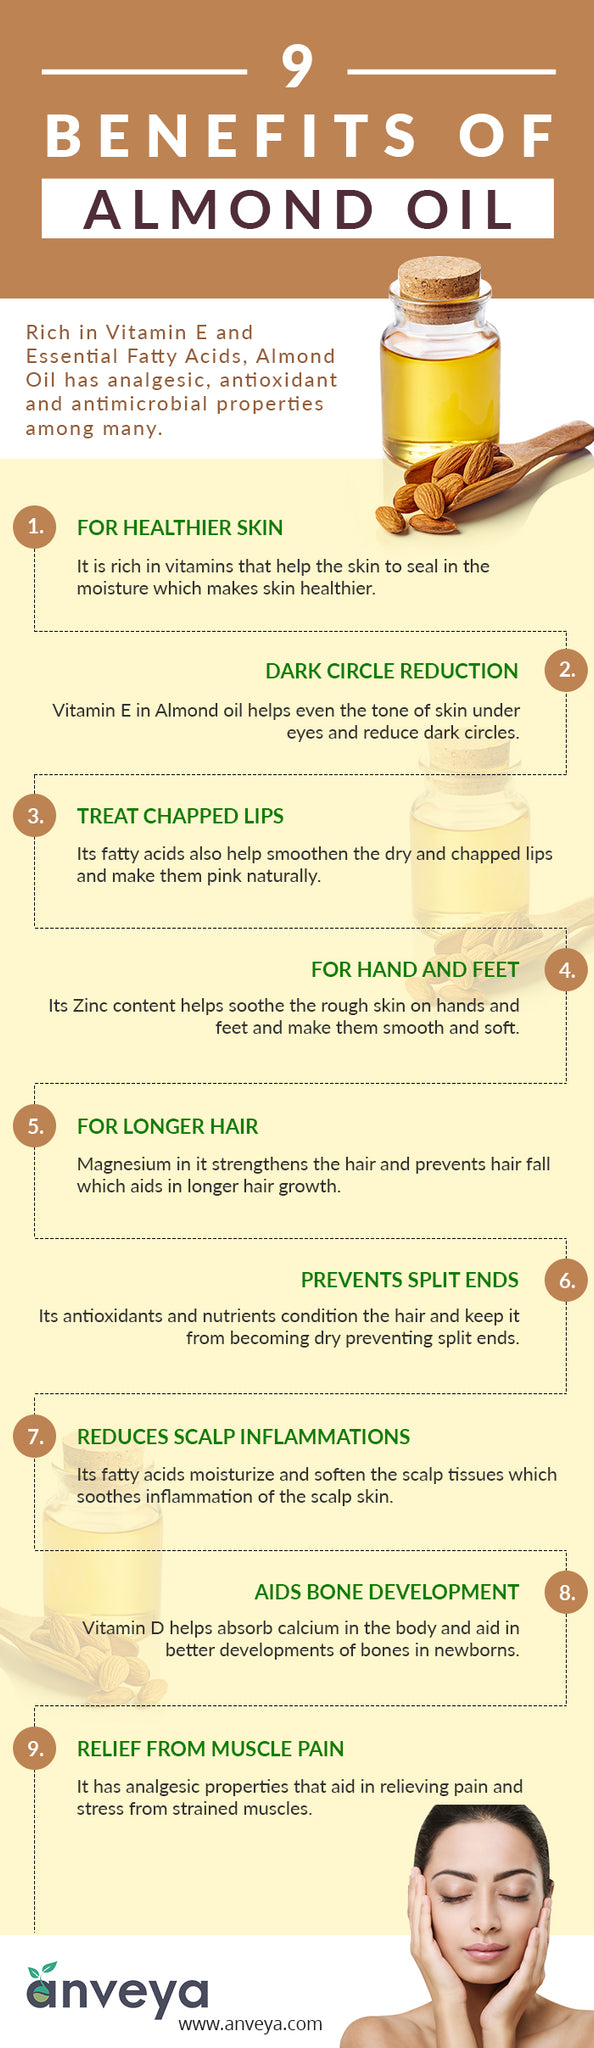 9 Benefits of Almond Oil